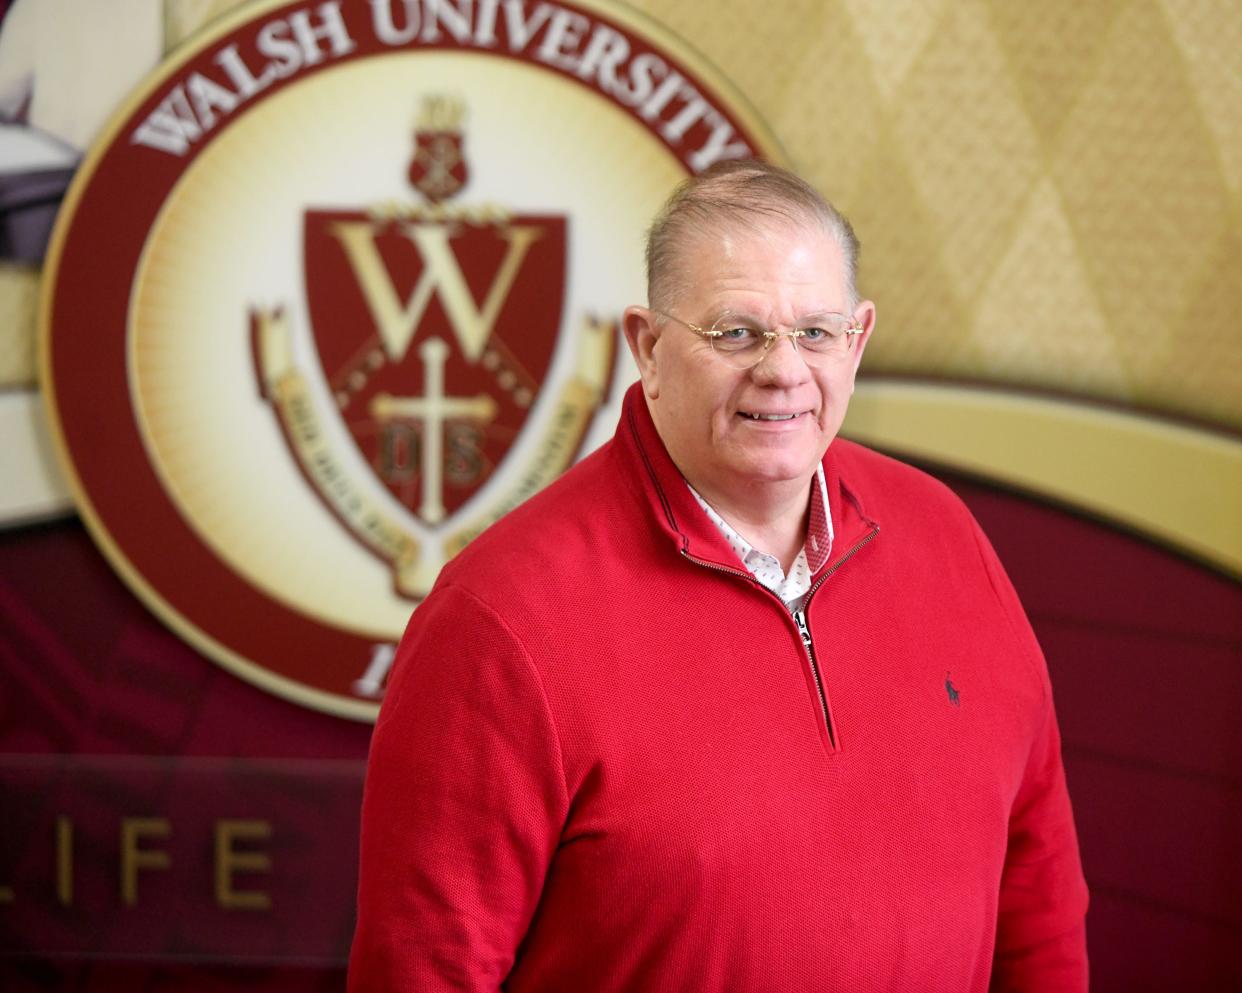 Jonathan Stump serves as director of development at Walsh University in North Canton.